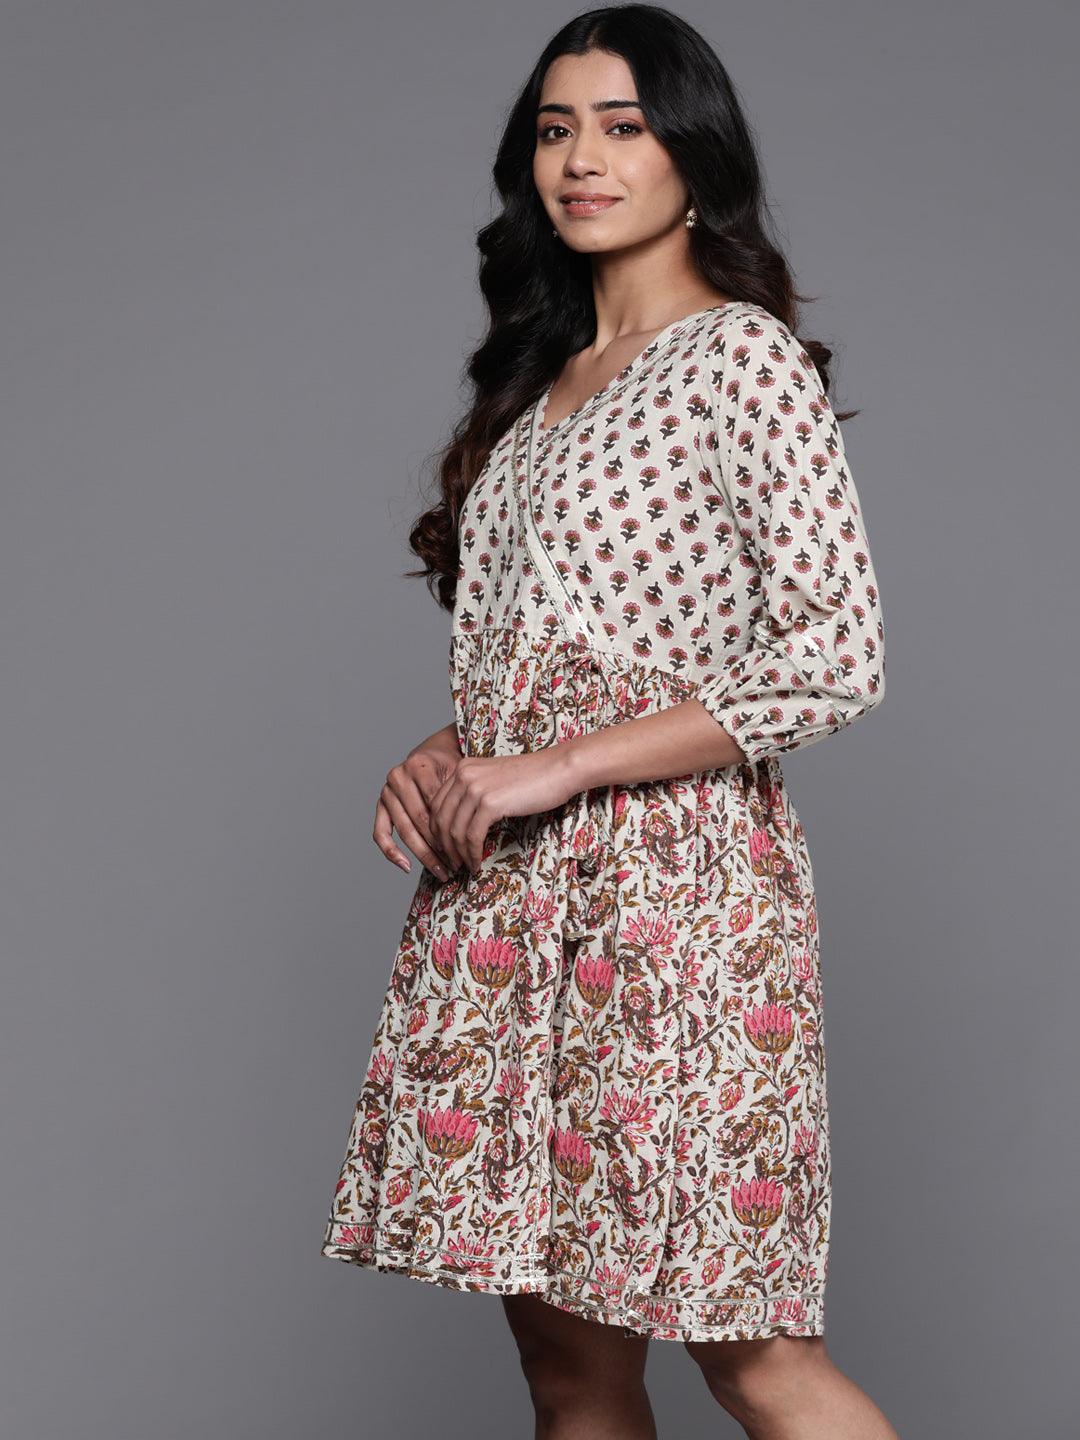 Beige Printed Cotton Fit and Flare Dress - ShopLibas